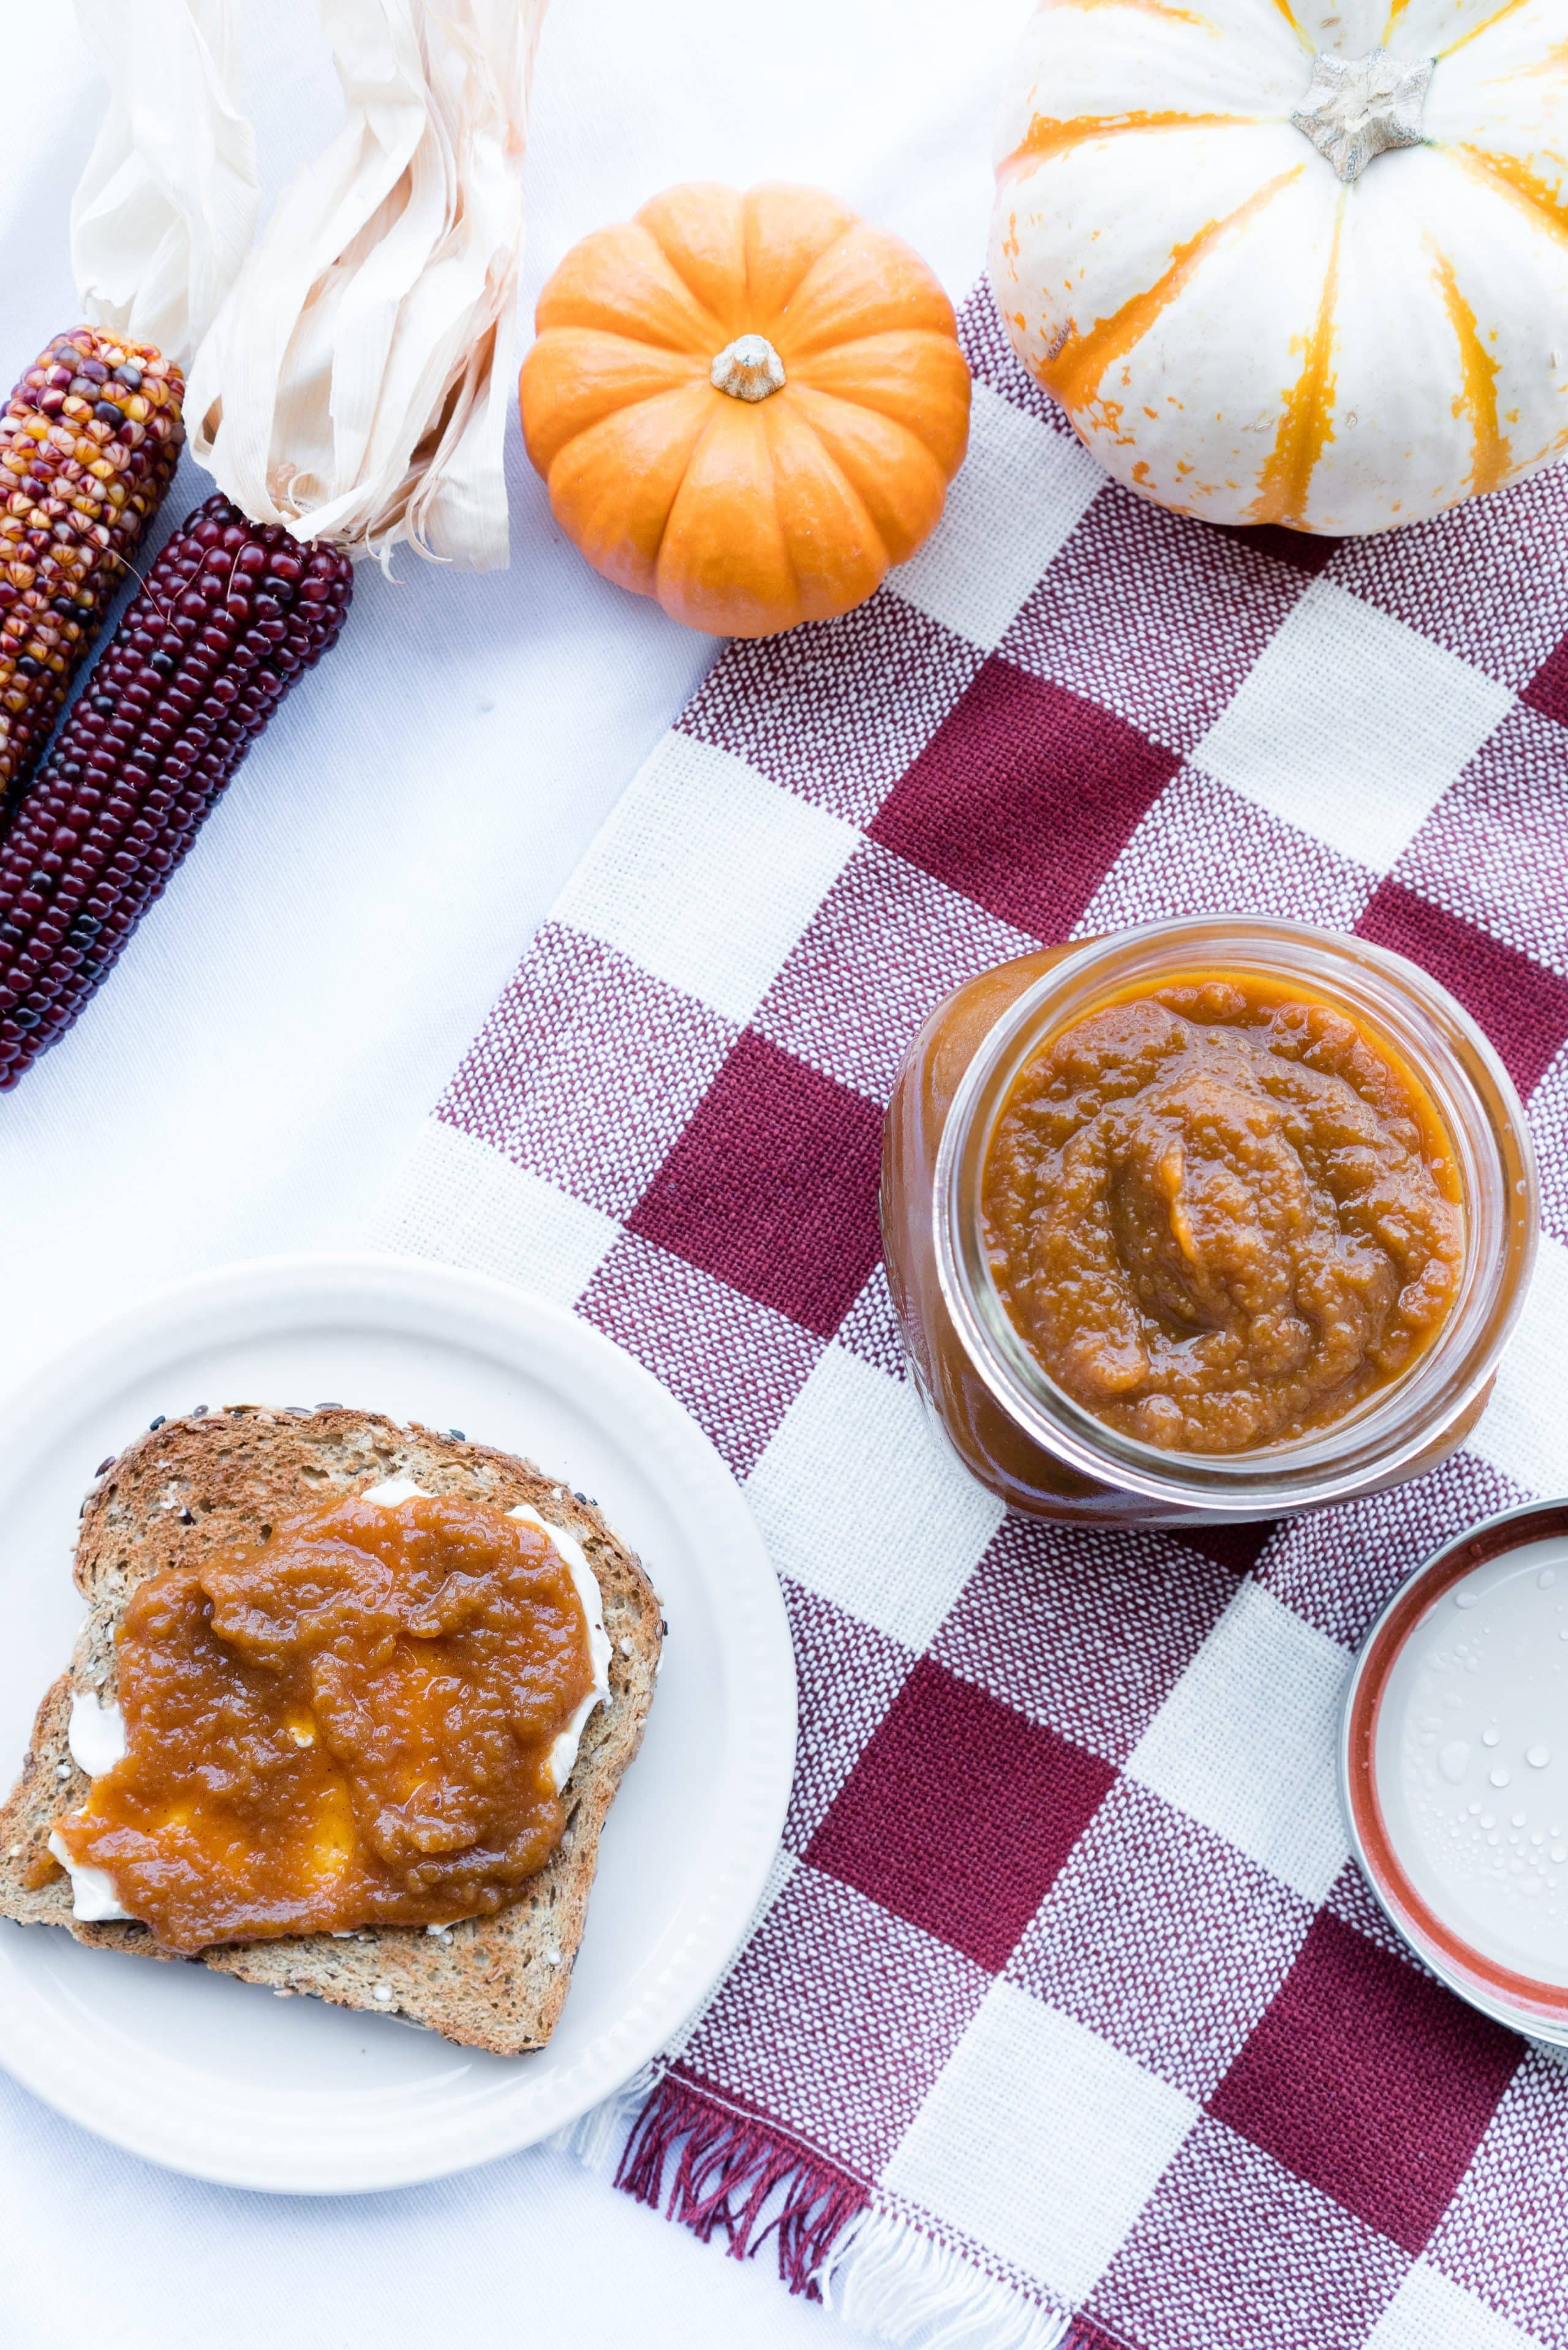 Apple Pumpkin Butter – Easy stove-top recipe for Apple Pumpkin Butter! Pumpkin puree, applesauce, maple syrup, brown sugar, and lemon juice are simmered together with cinnamon & spices. Perfect for holiday gifting or a touch of seasonal sweetness at breakfast! ♥ | freeyourfork.com